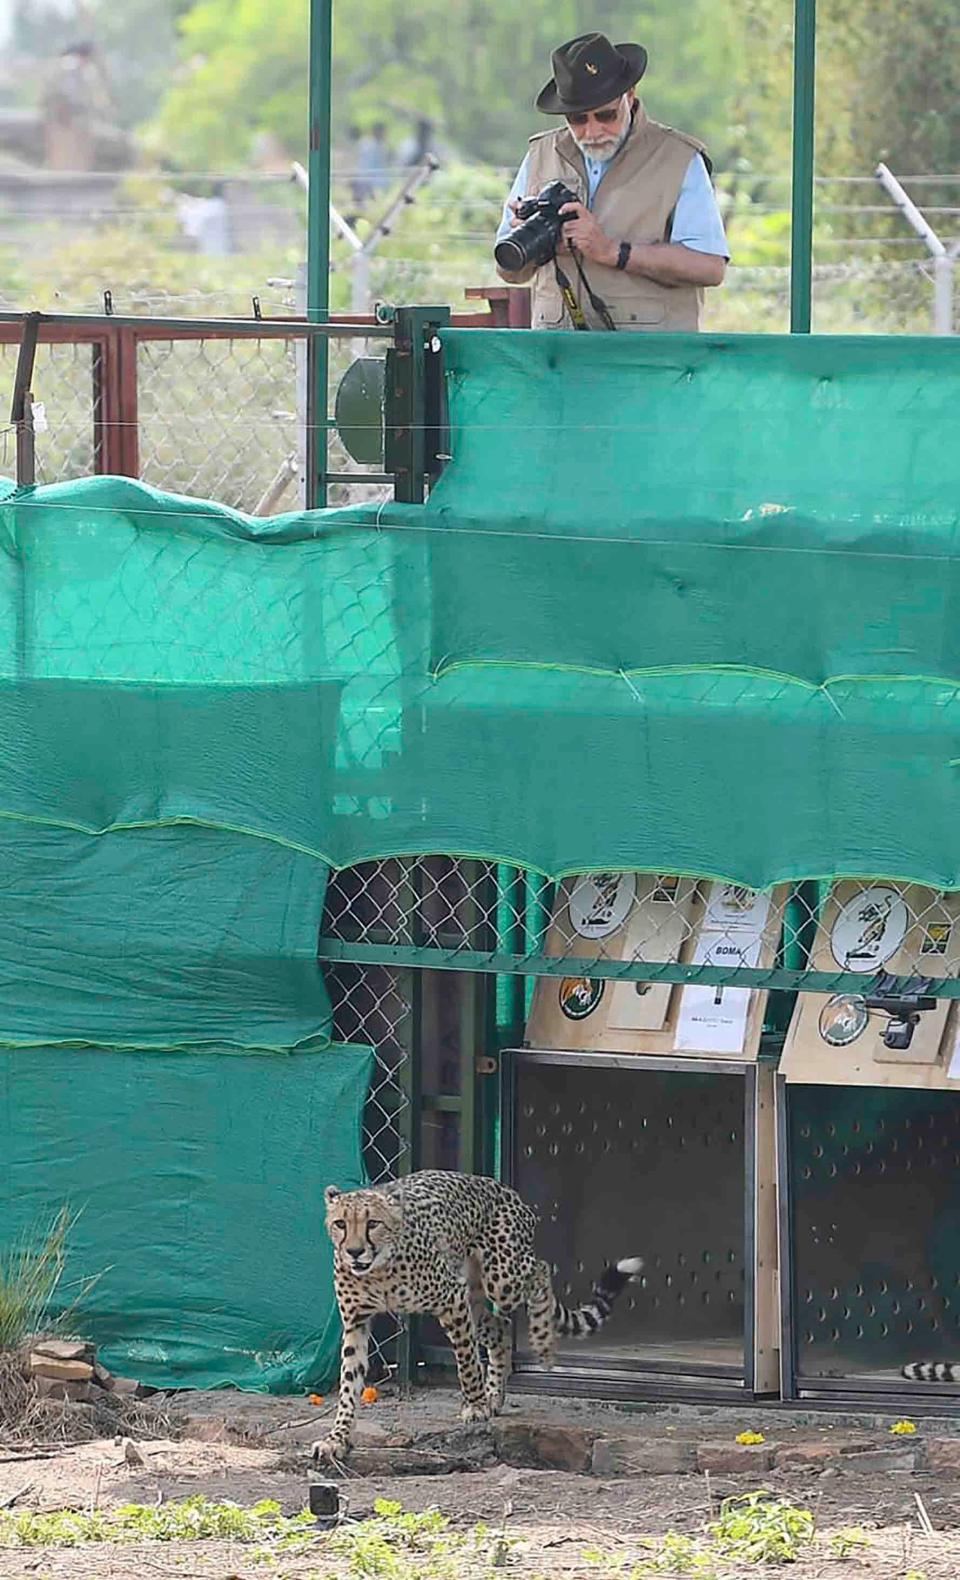 Indian Prime Minister Narendra Modi watching a cheetah after it was released in an enclosure at Kuno National Park, in the central Indian state of Madhya Pradesh, Saturday, Sept. 17, 2022.